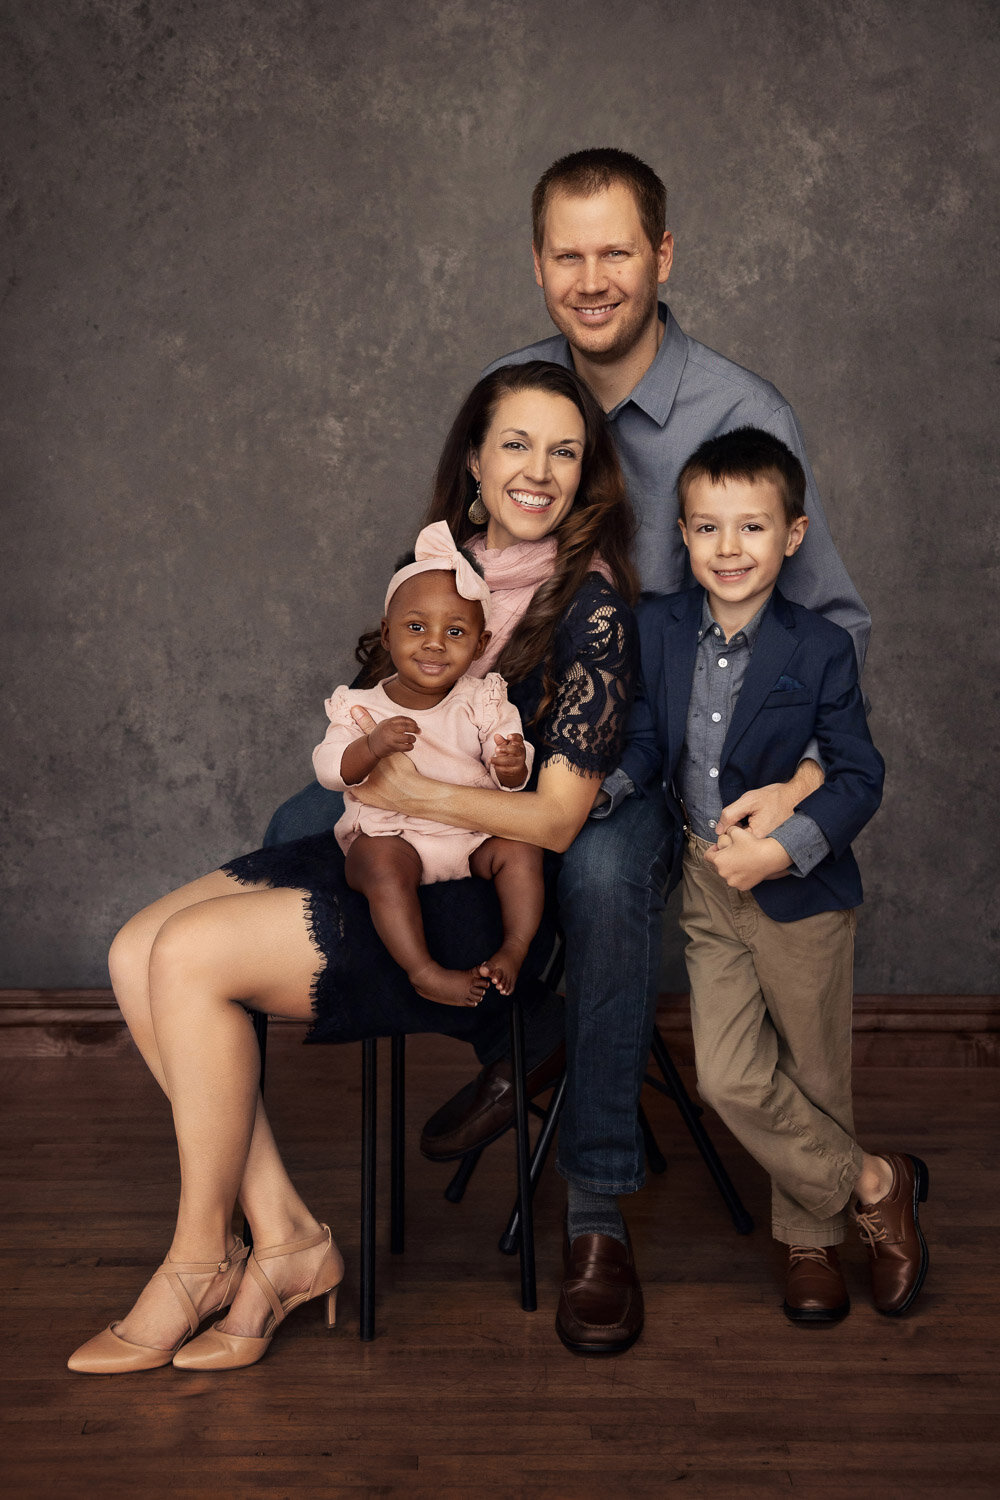 Family Photo Gallery - JCPenney Portraits  Family photos, Family photoshoot  poses, Family photoshoot